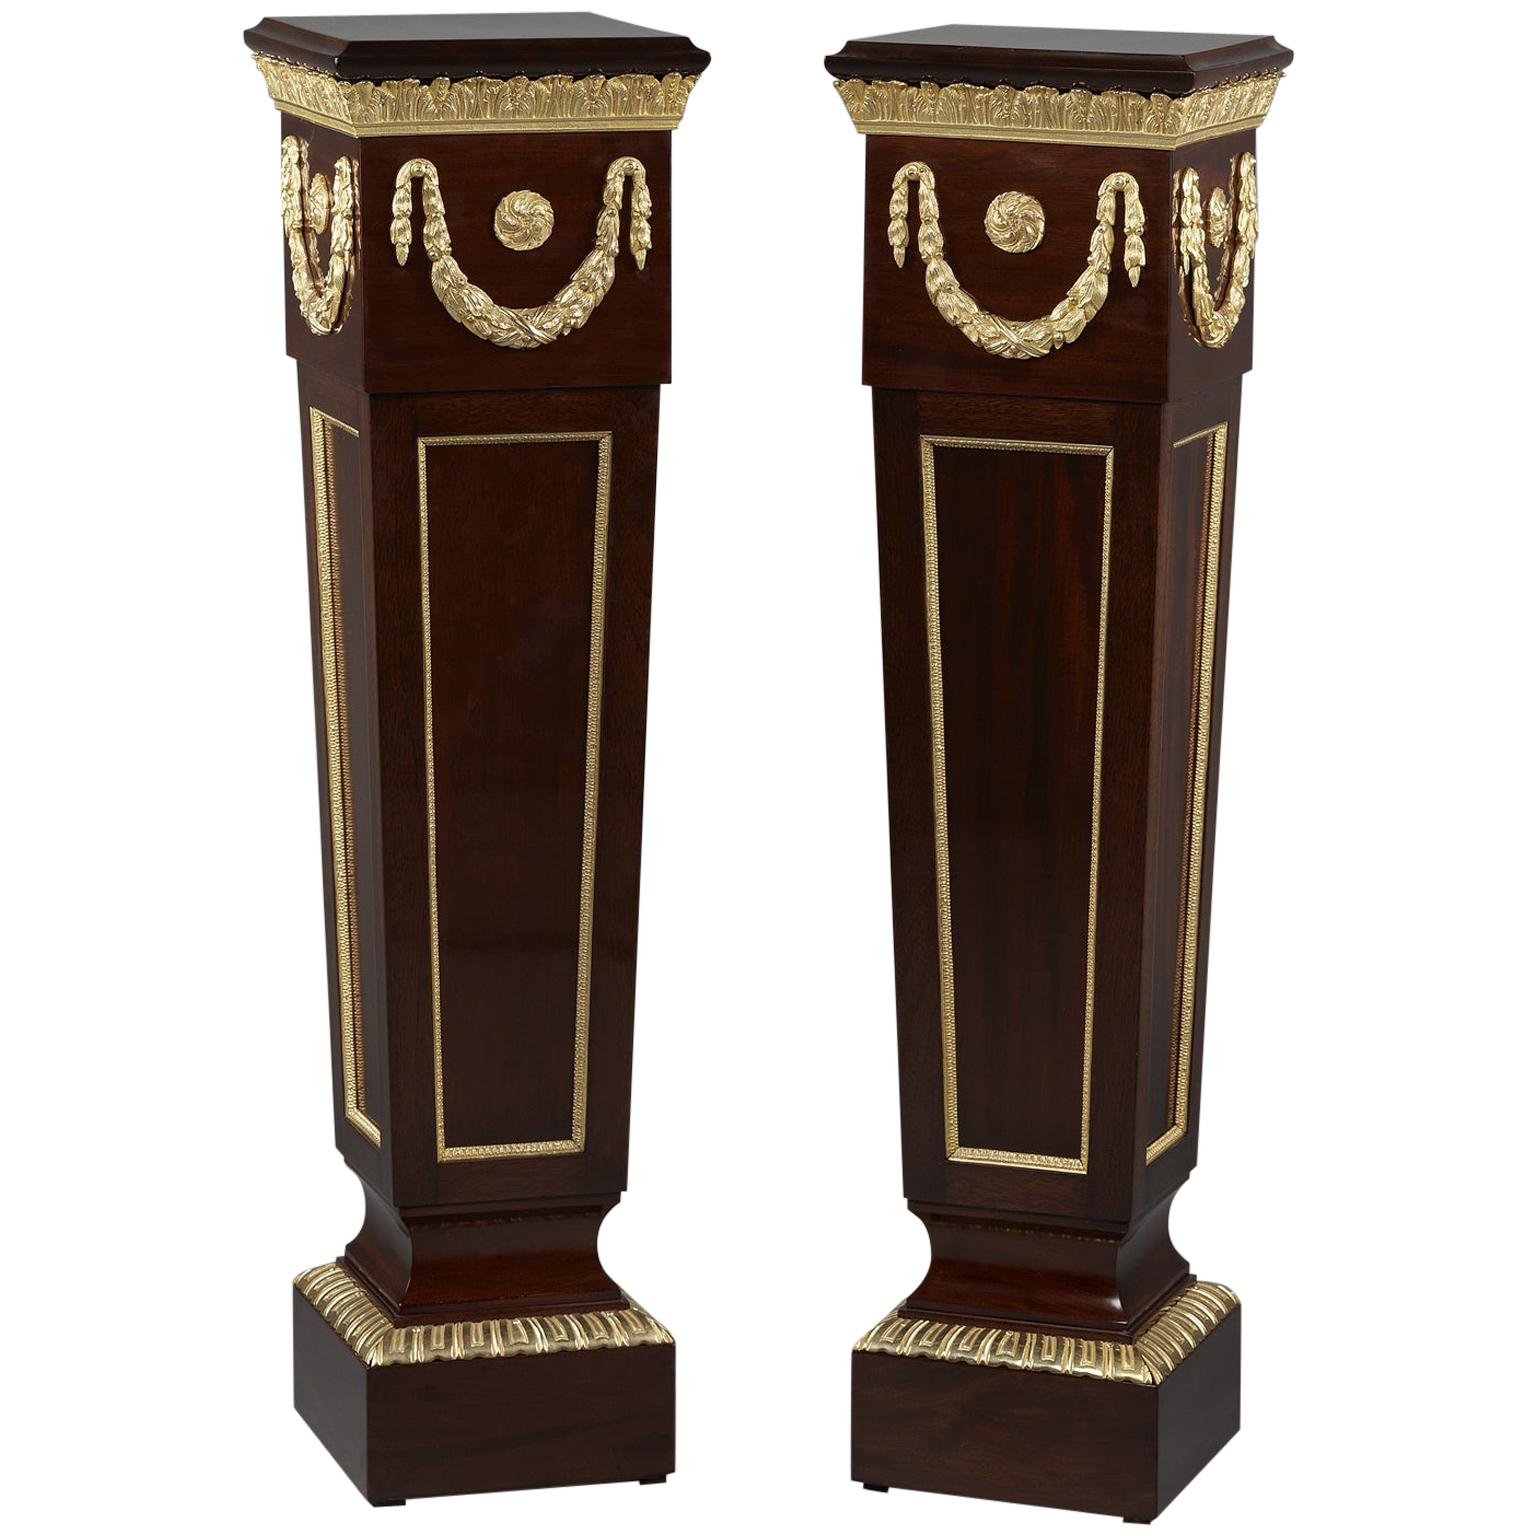 Pair of Louis XVI Style Gilt-Bronze Mounted Mahogany Pedestals, circa 1900 For Sale